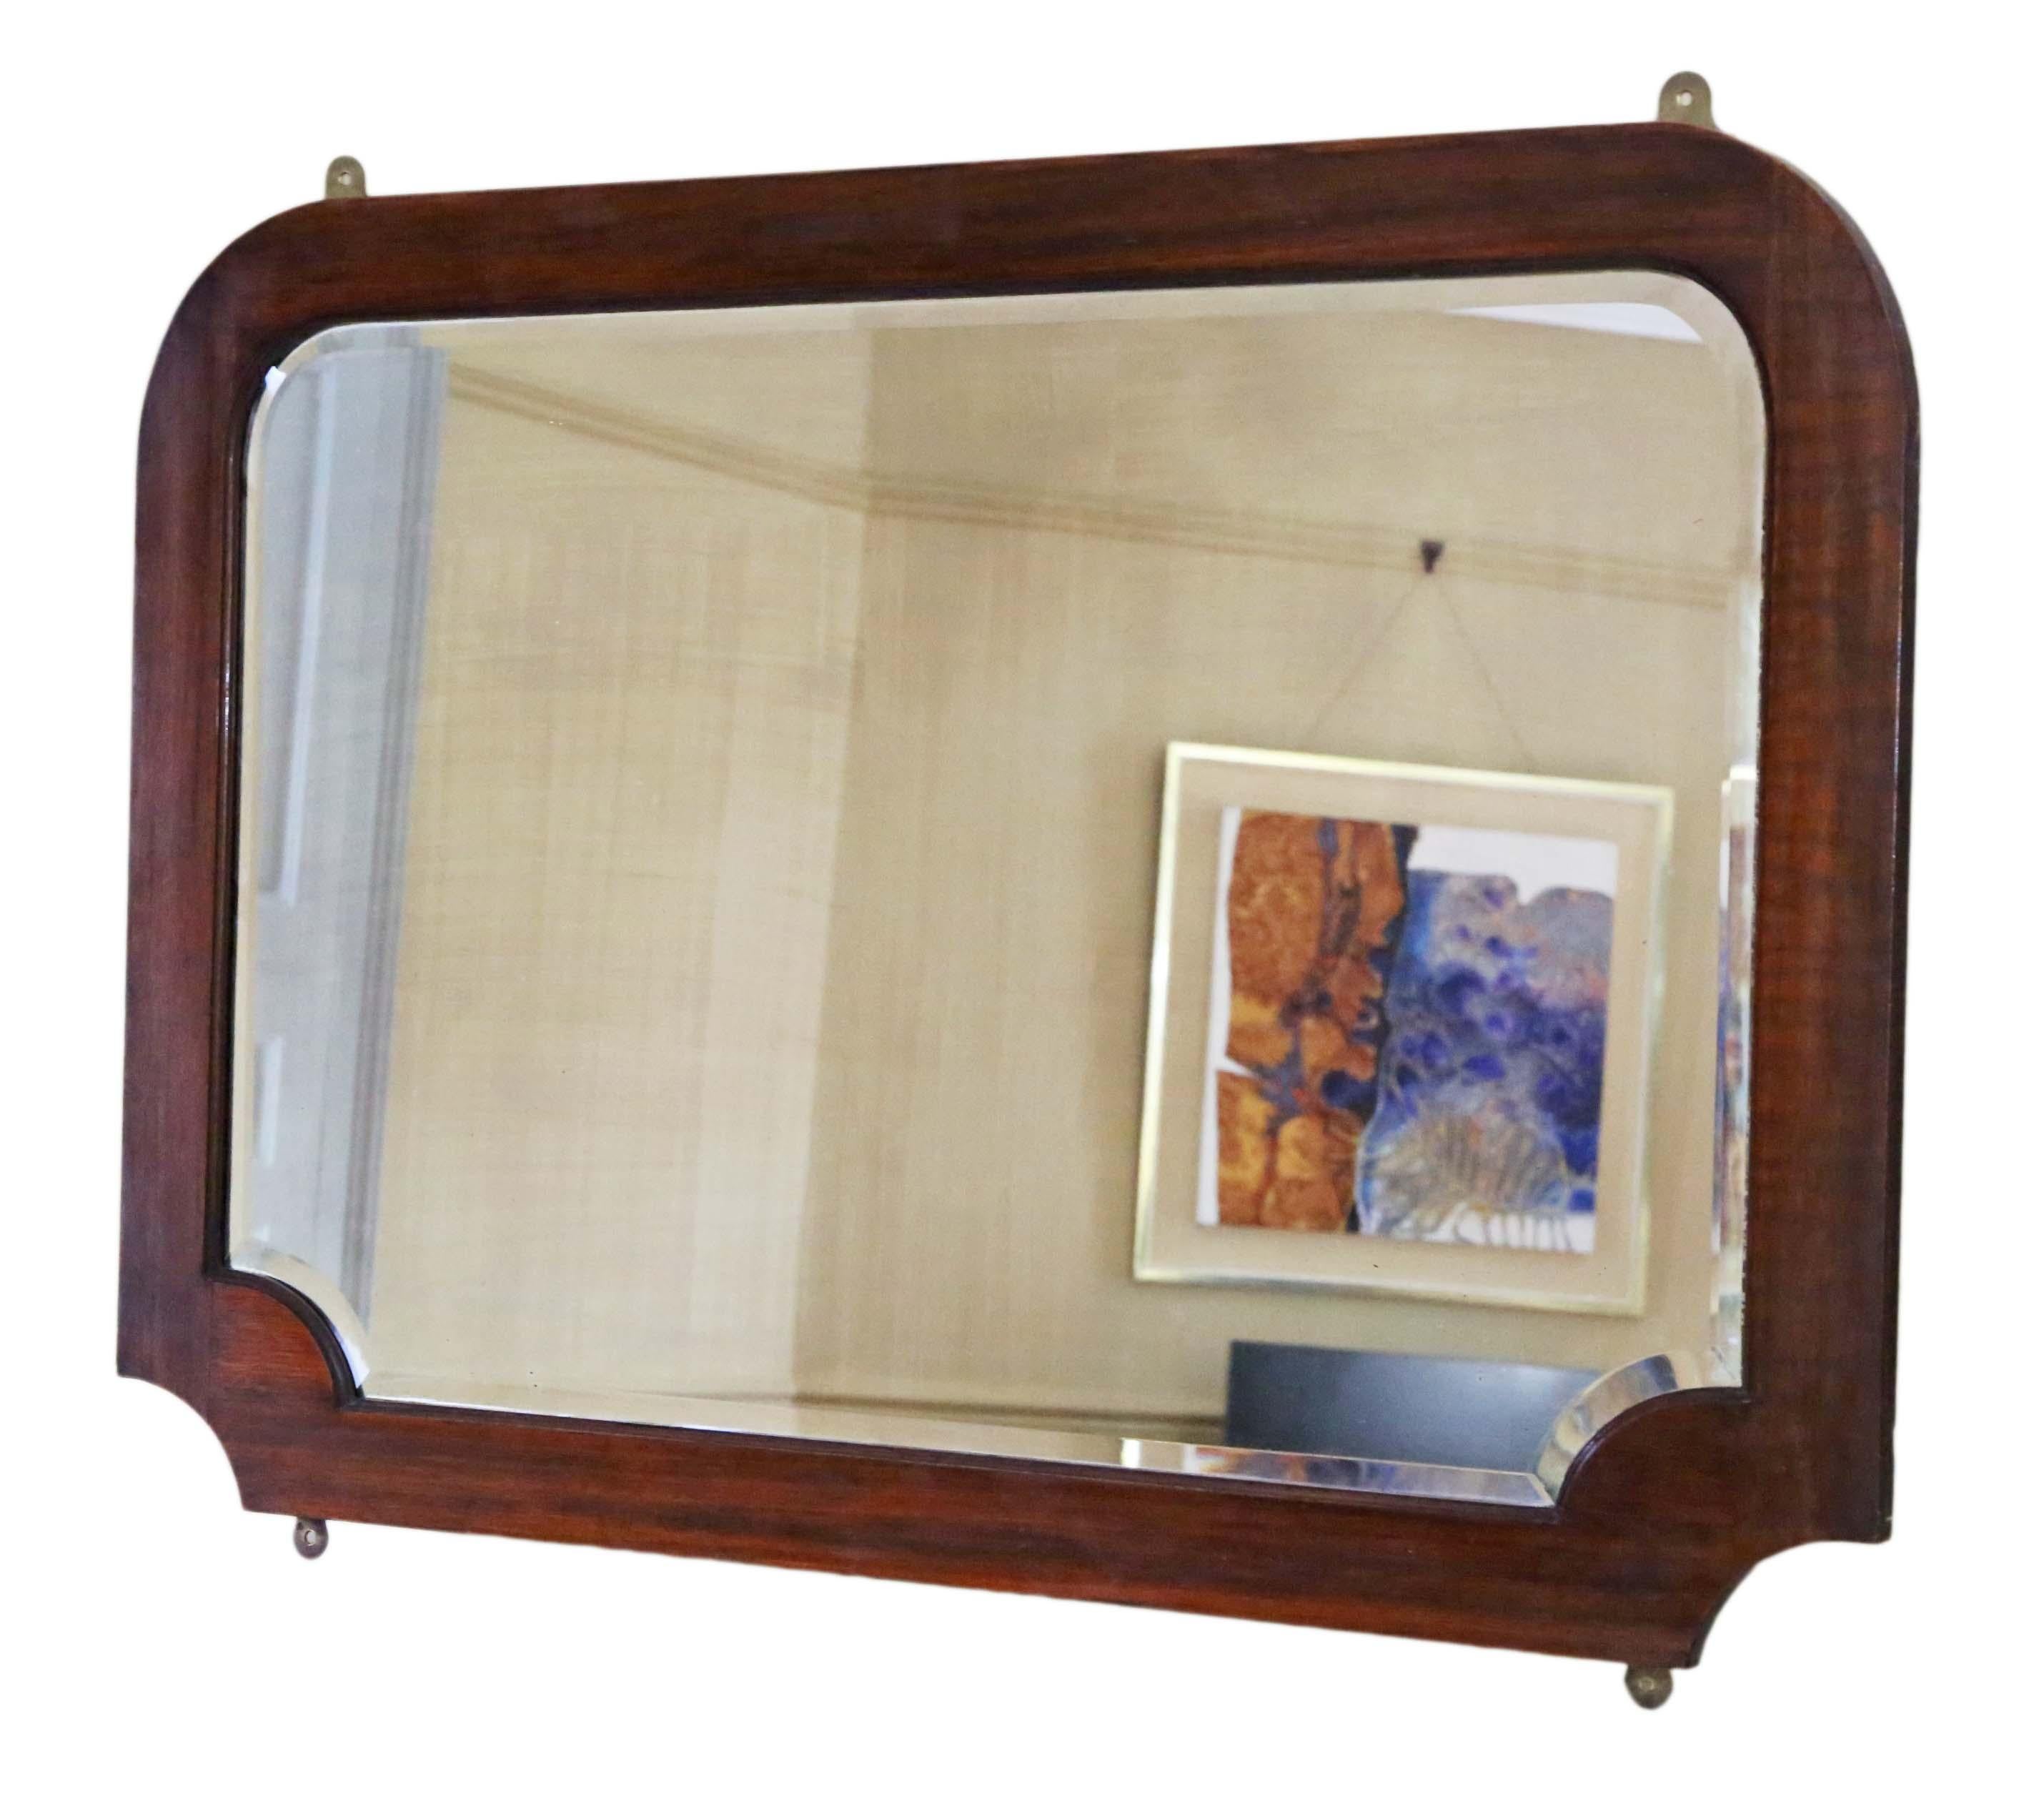 Antique large quality Art Nouveau mahogany wall mirror or overmantle, C1915. Lovely simplicity charm and elegance.

An impressive find, that would look amazing in the right location. No loose joints or woodworm.

Original bevel edge mirrored